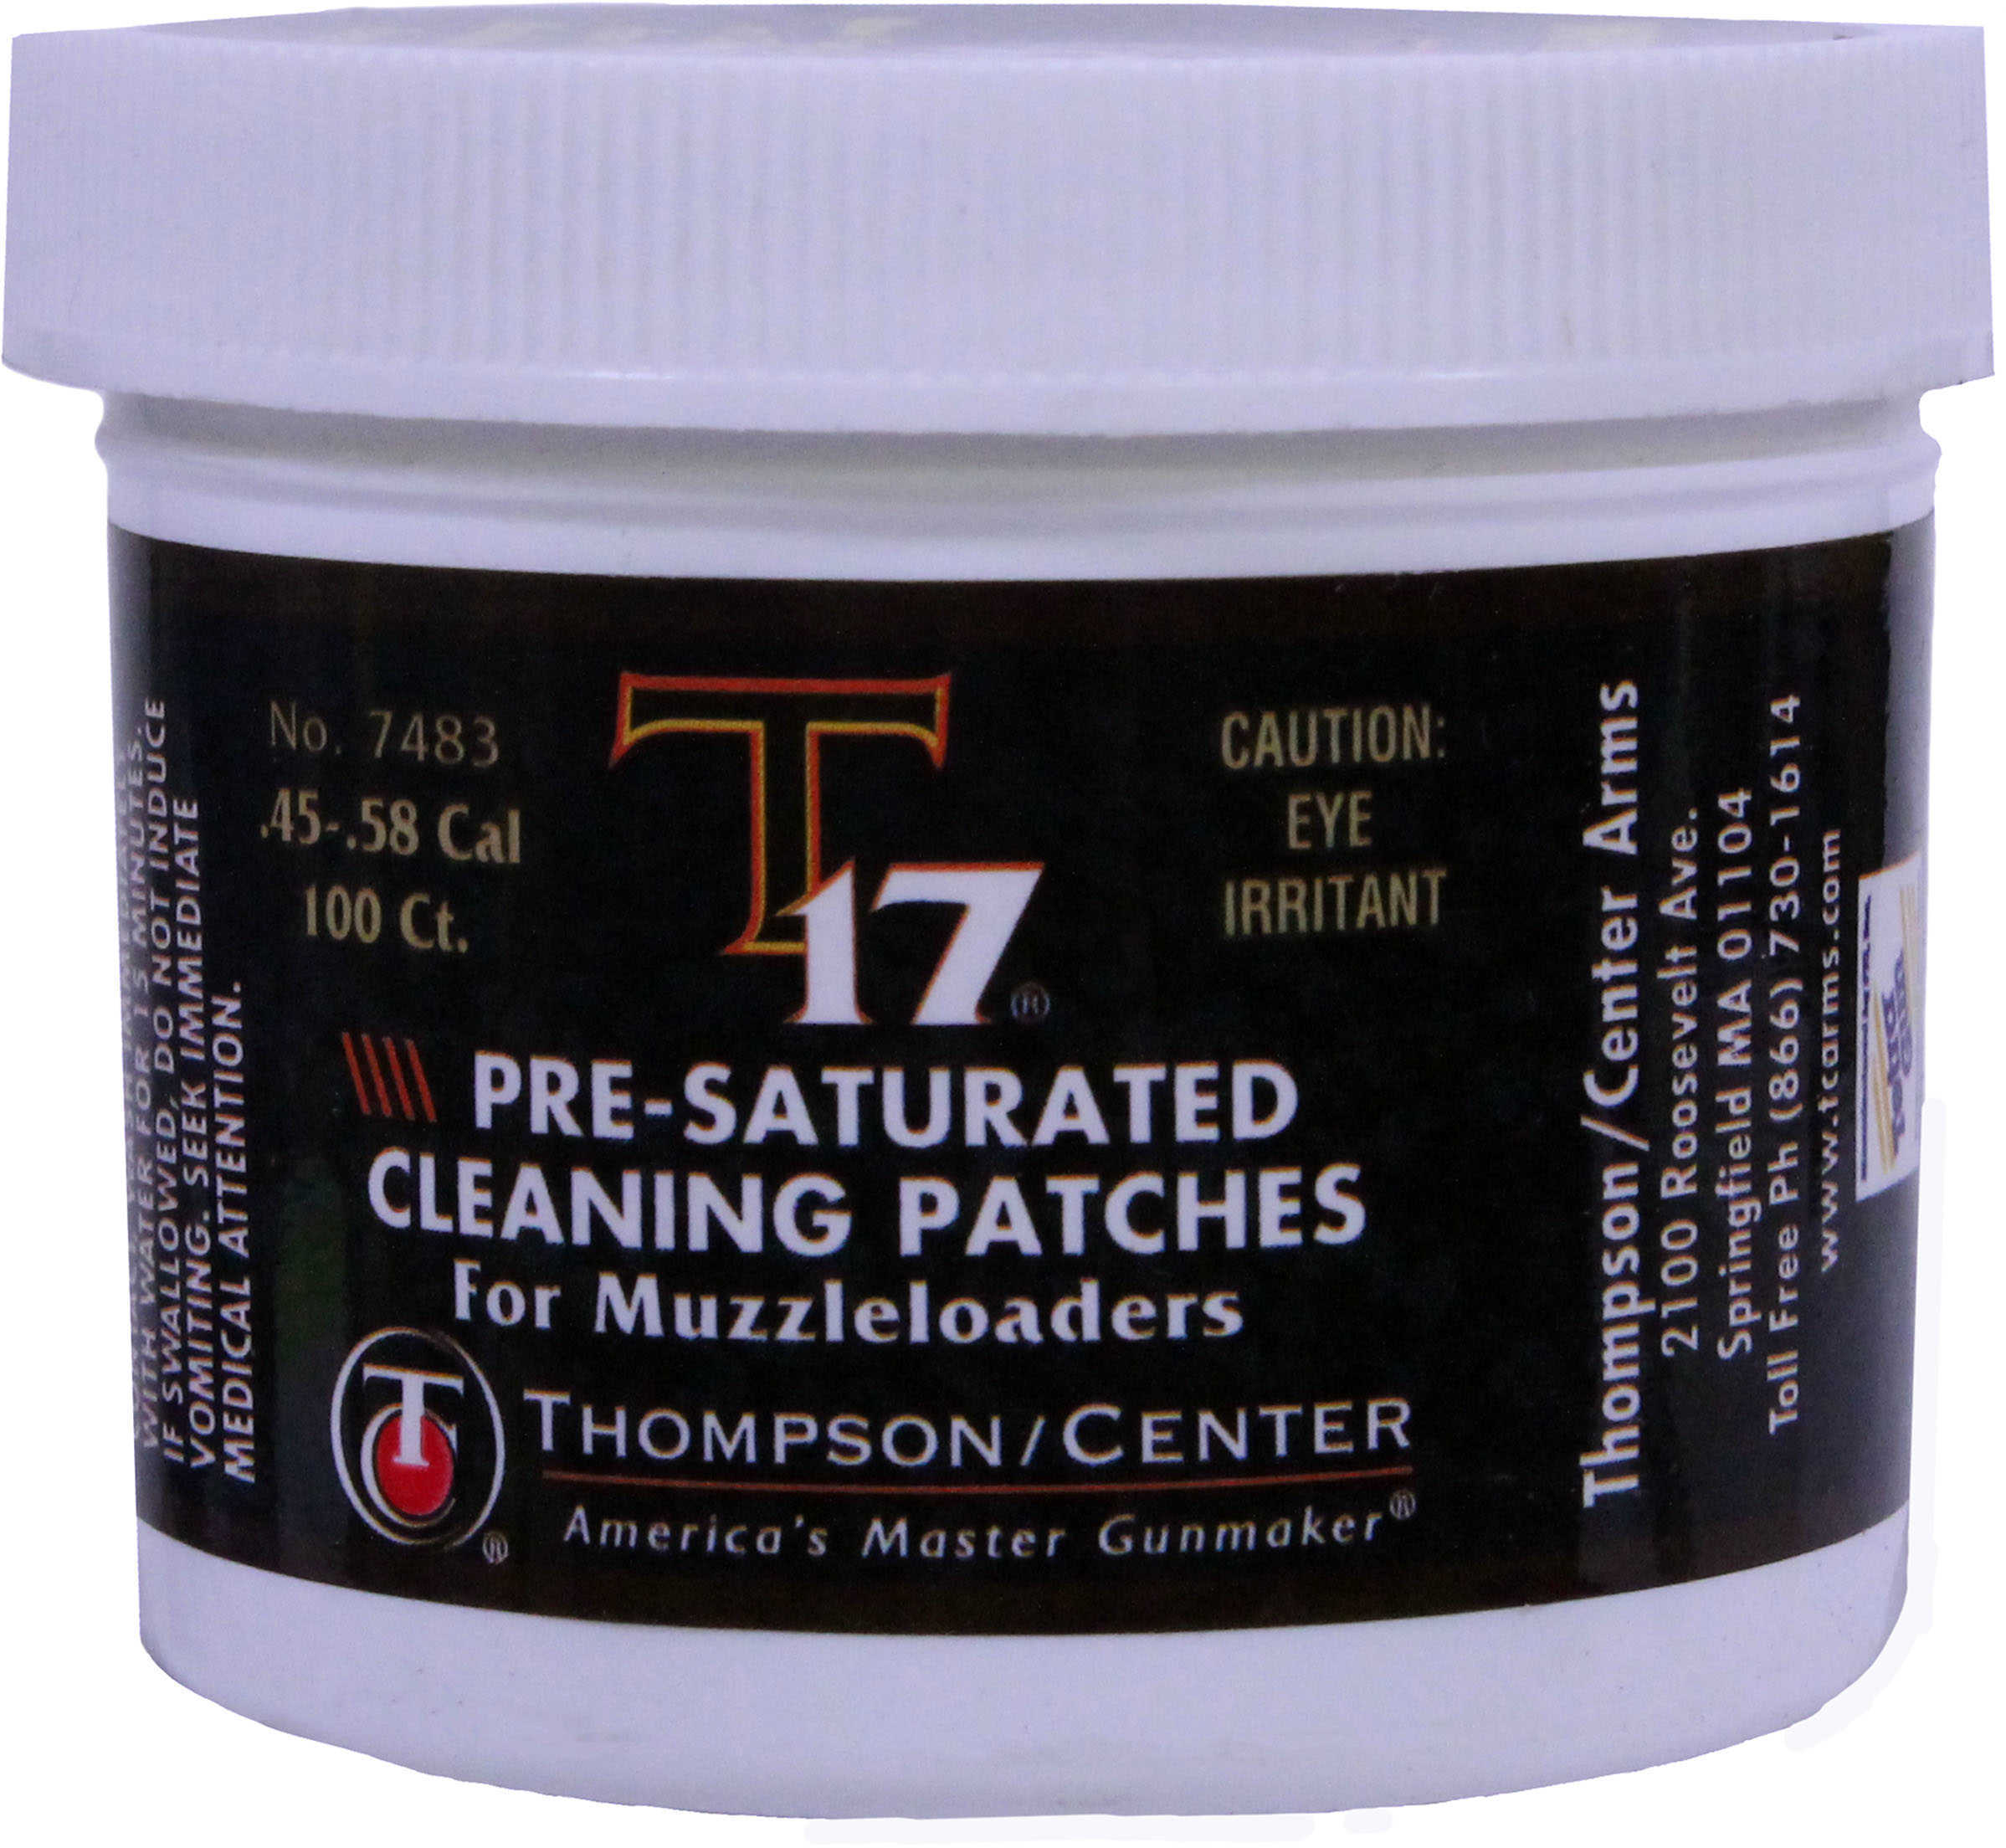 Thompson Center Bore Cleaning Patches Md: 7483